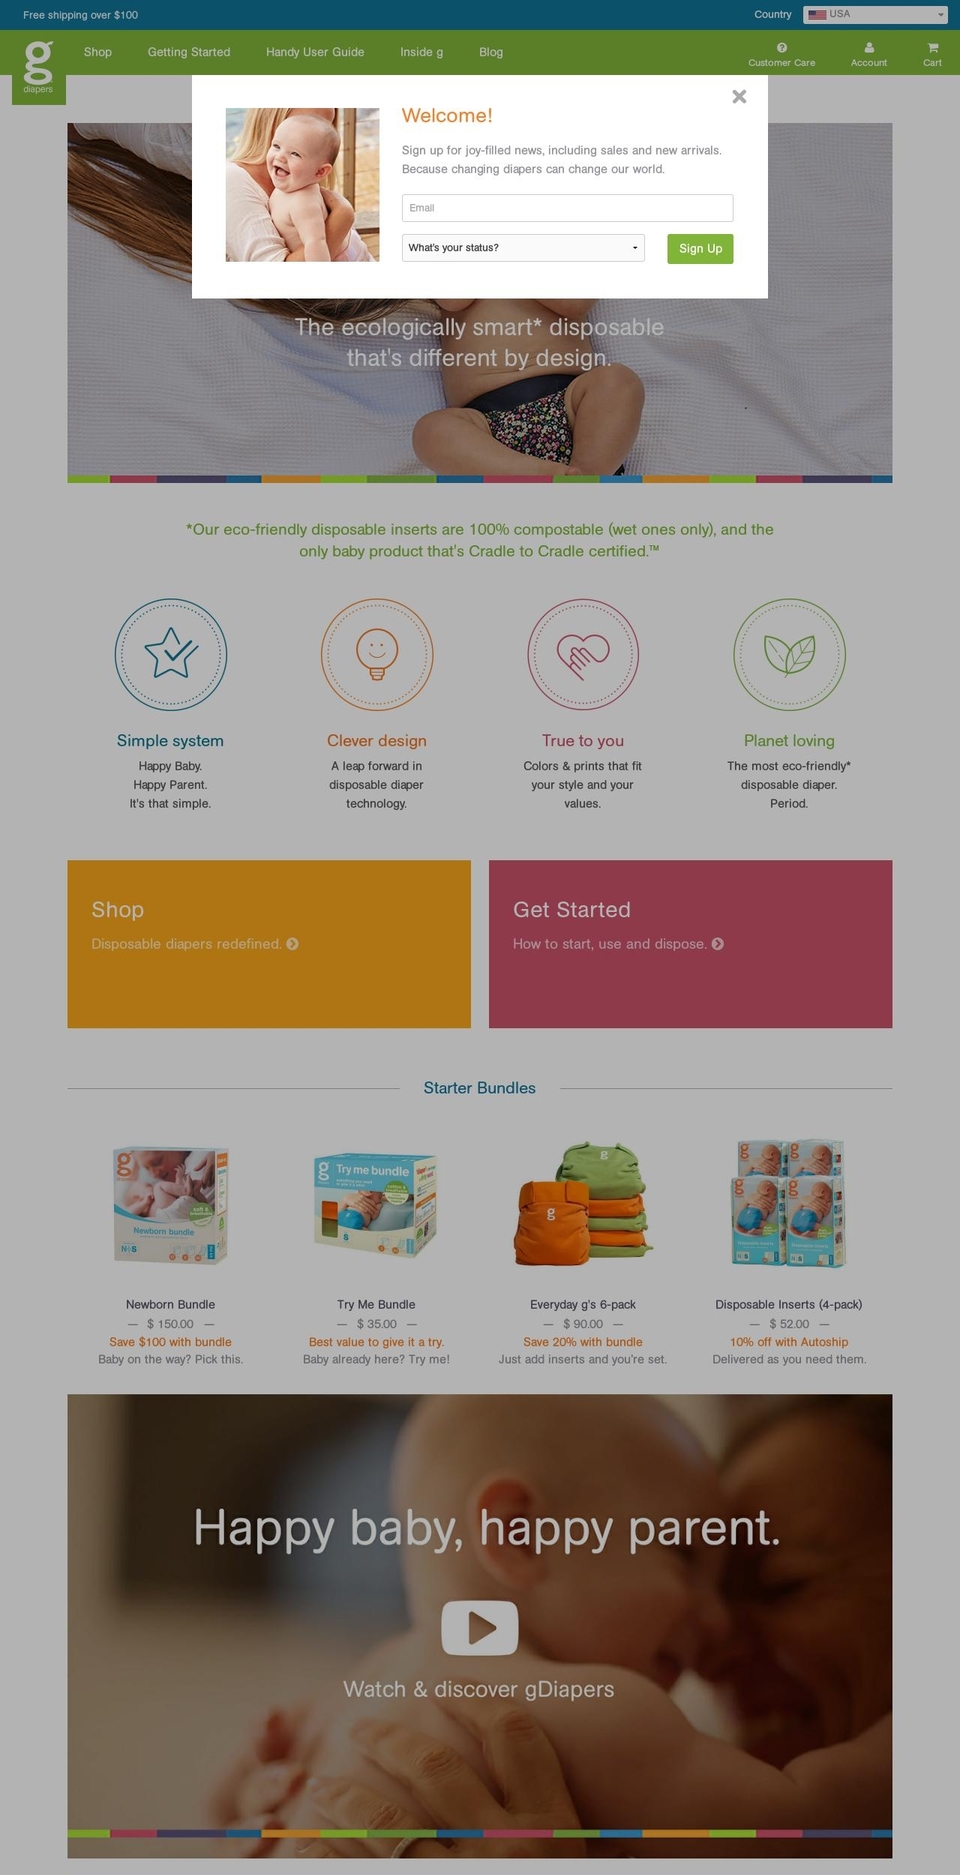 gdiapers.me shopify website screenshot